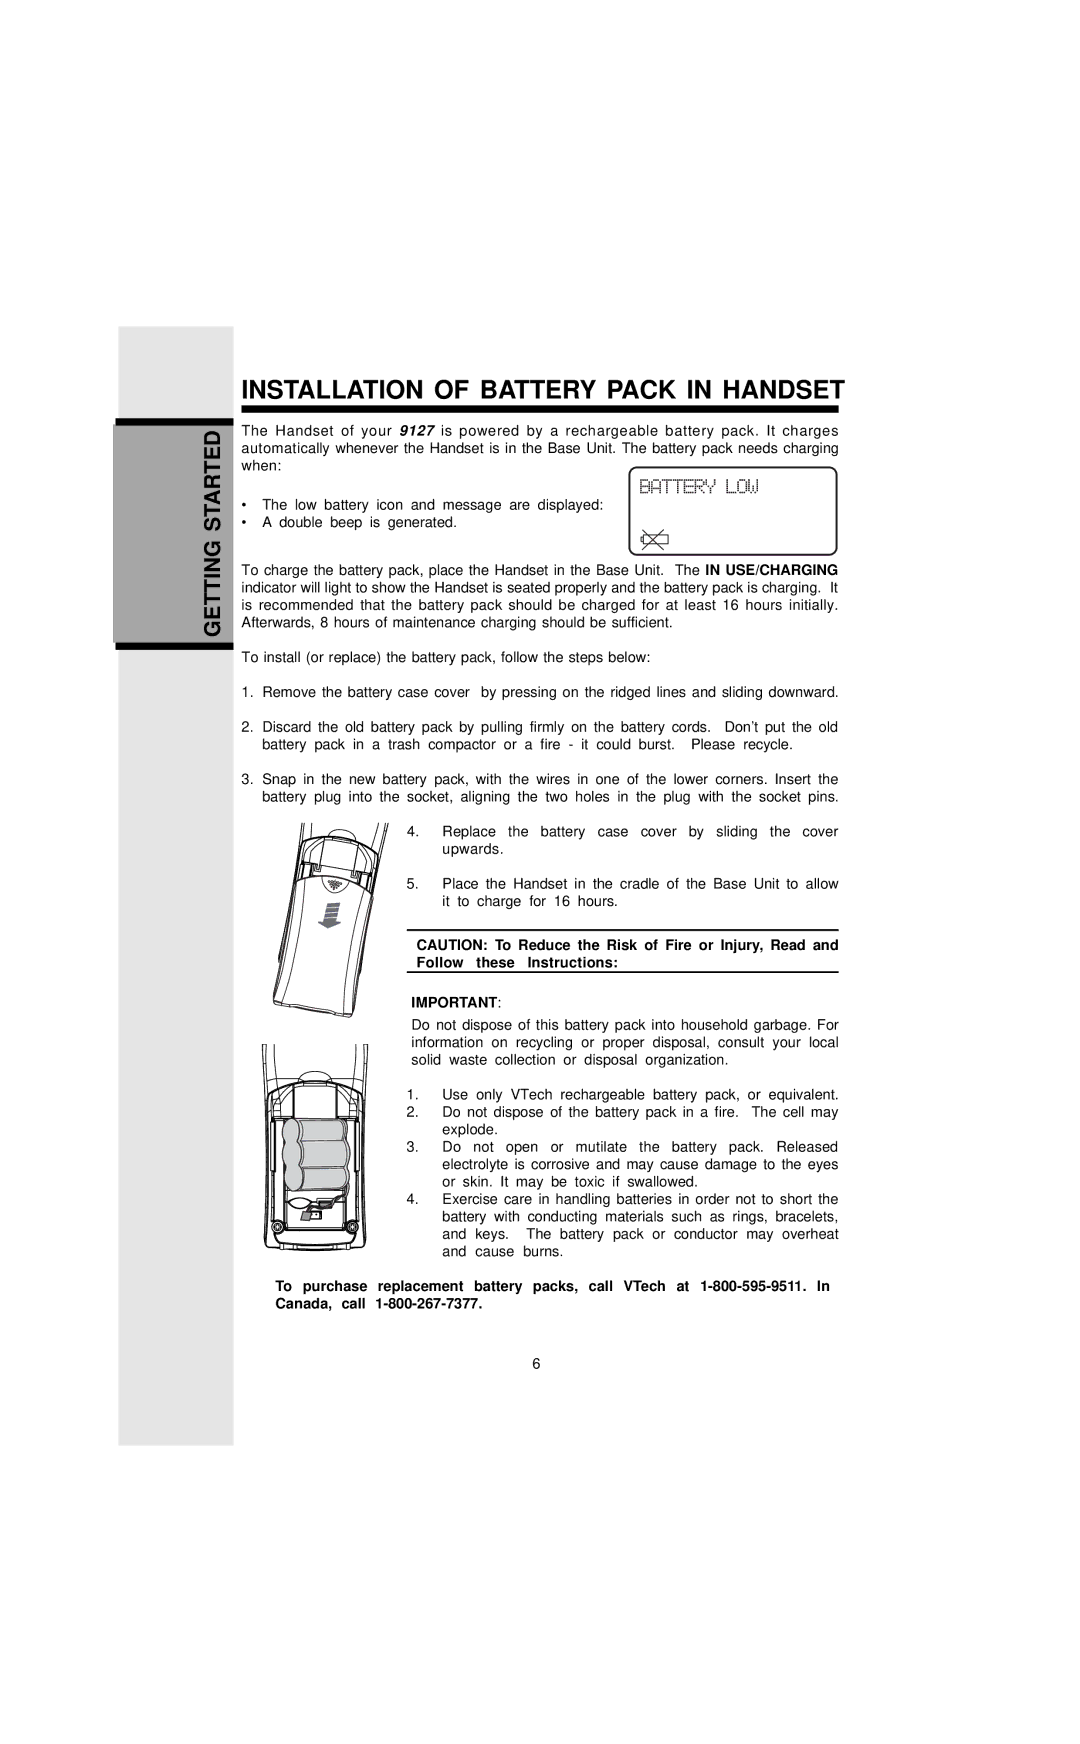 VTech 9127 important safety instructions Installation of Battery Pack in Handset, Follow these Instructions 